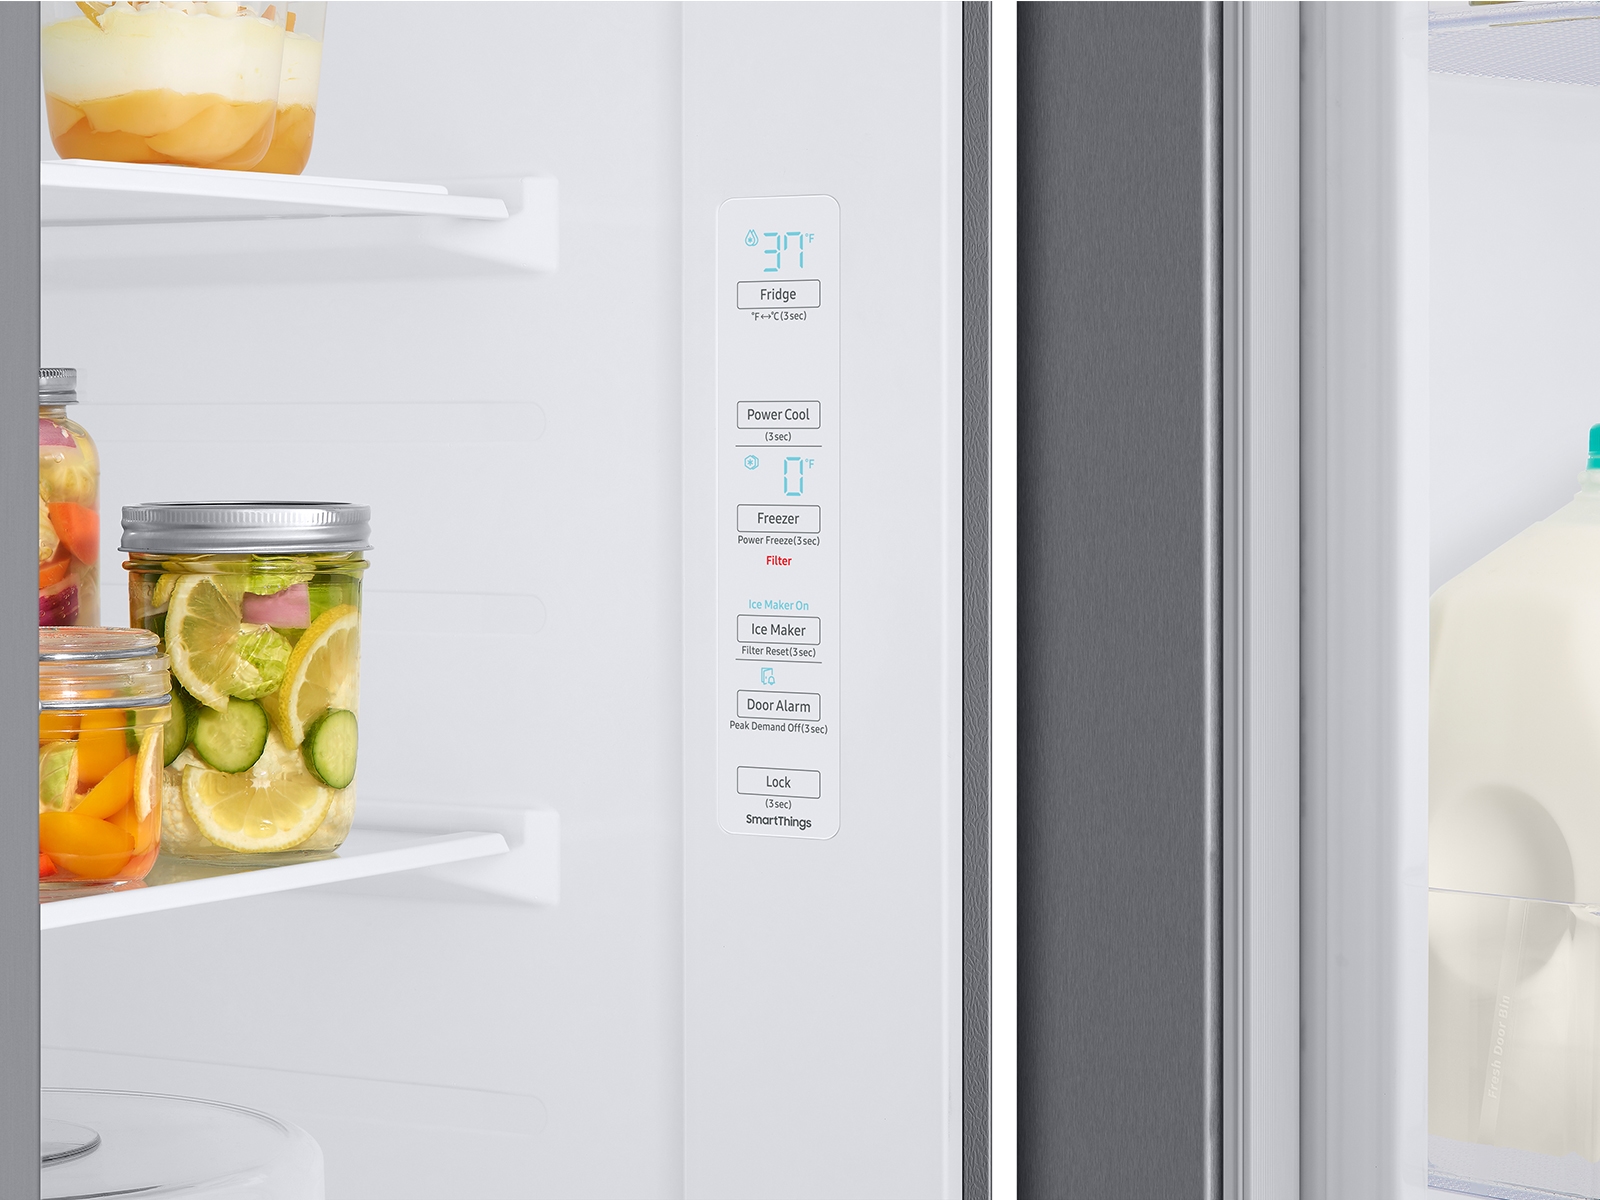 Samsung refrigerator shows OF OF, O FF, or scrolling bars